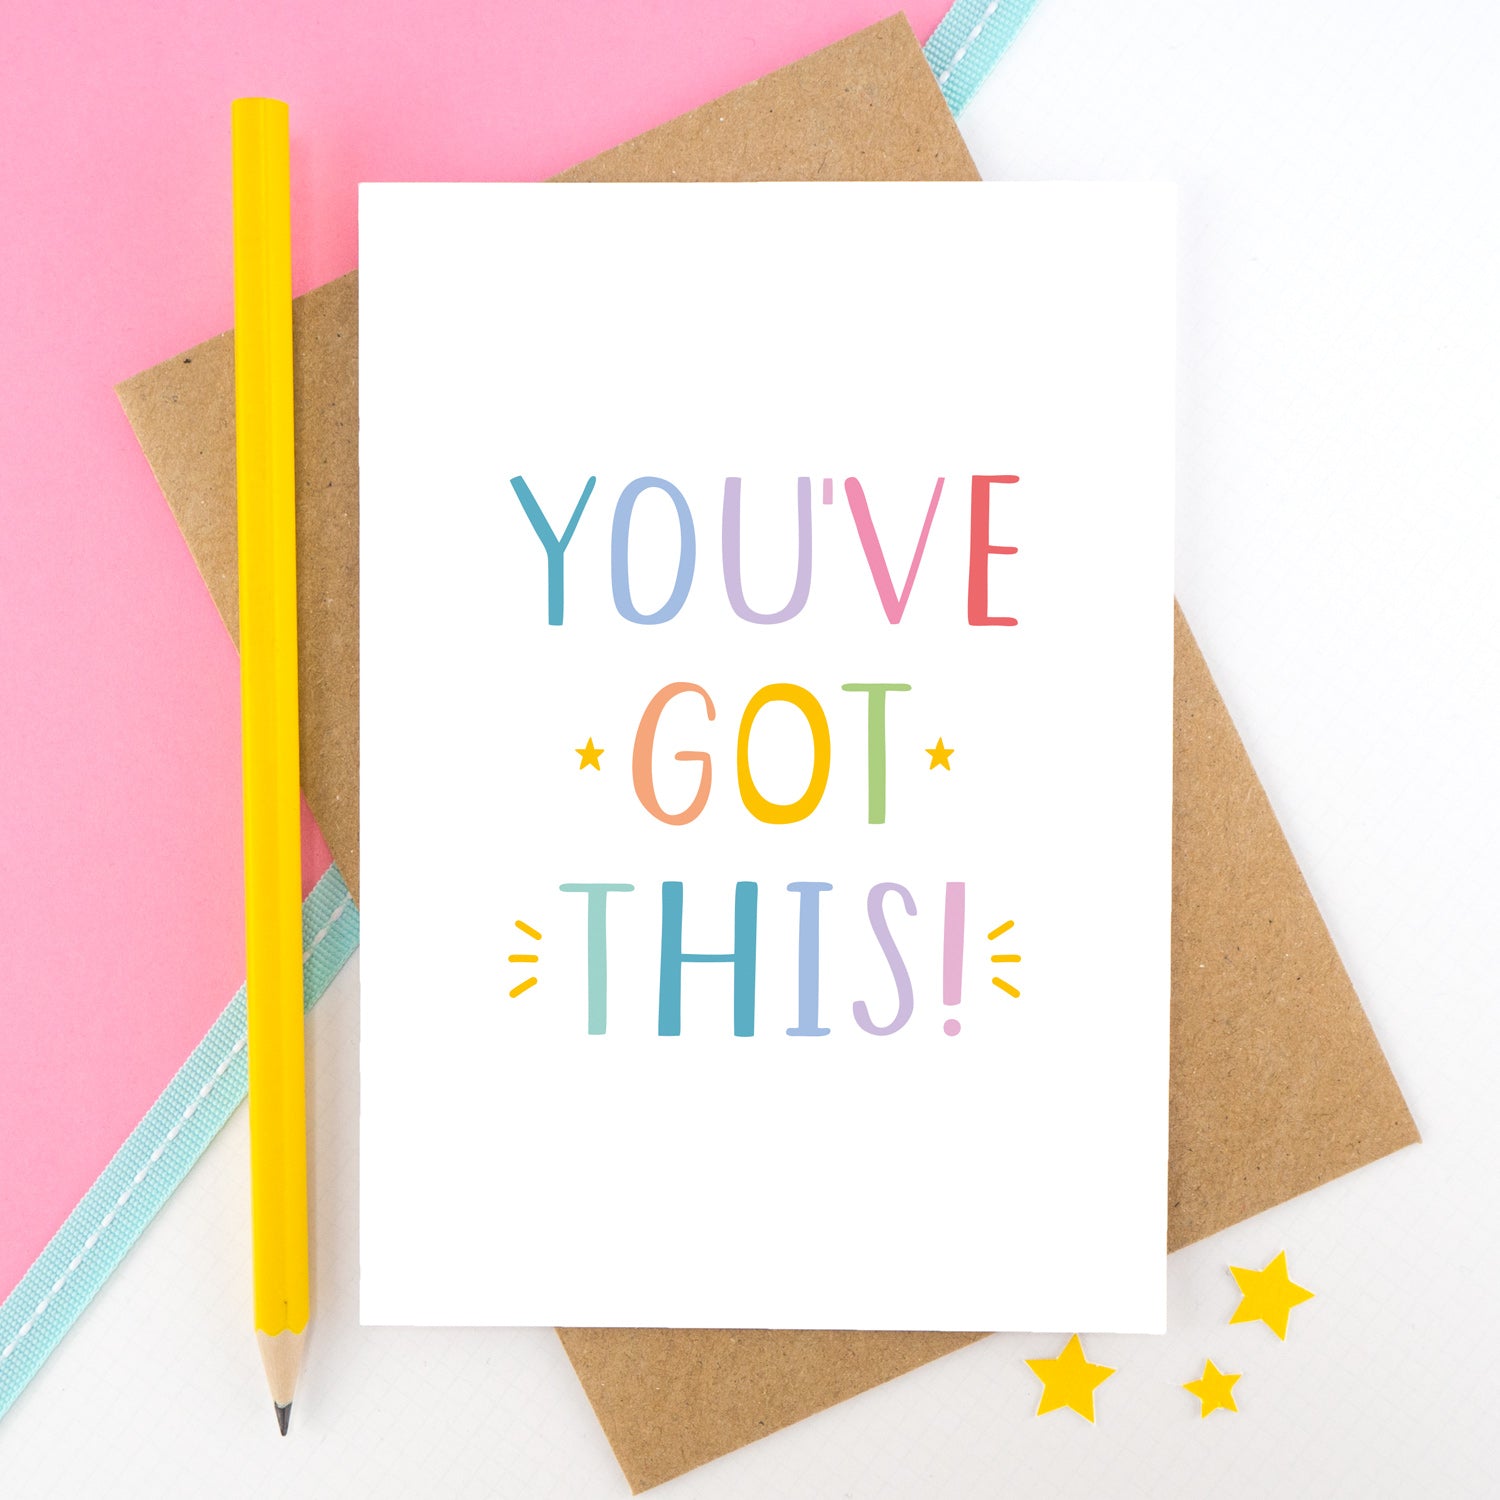 You've got this! A positive encouragement card photographed on a pink and white background with a teal ribbon and bright yellow pencil. The lettering on this card is in rainbow tones.